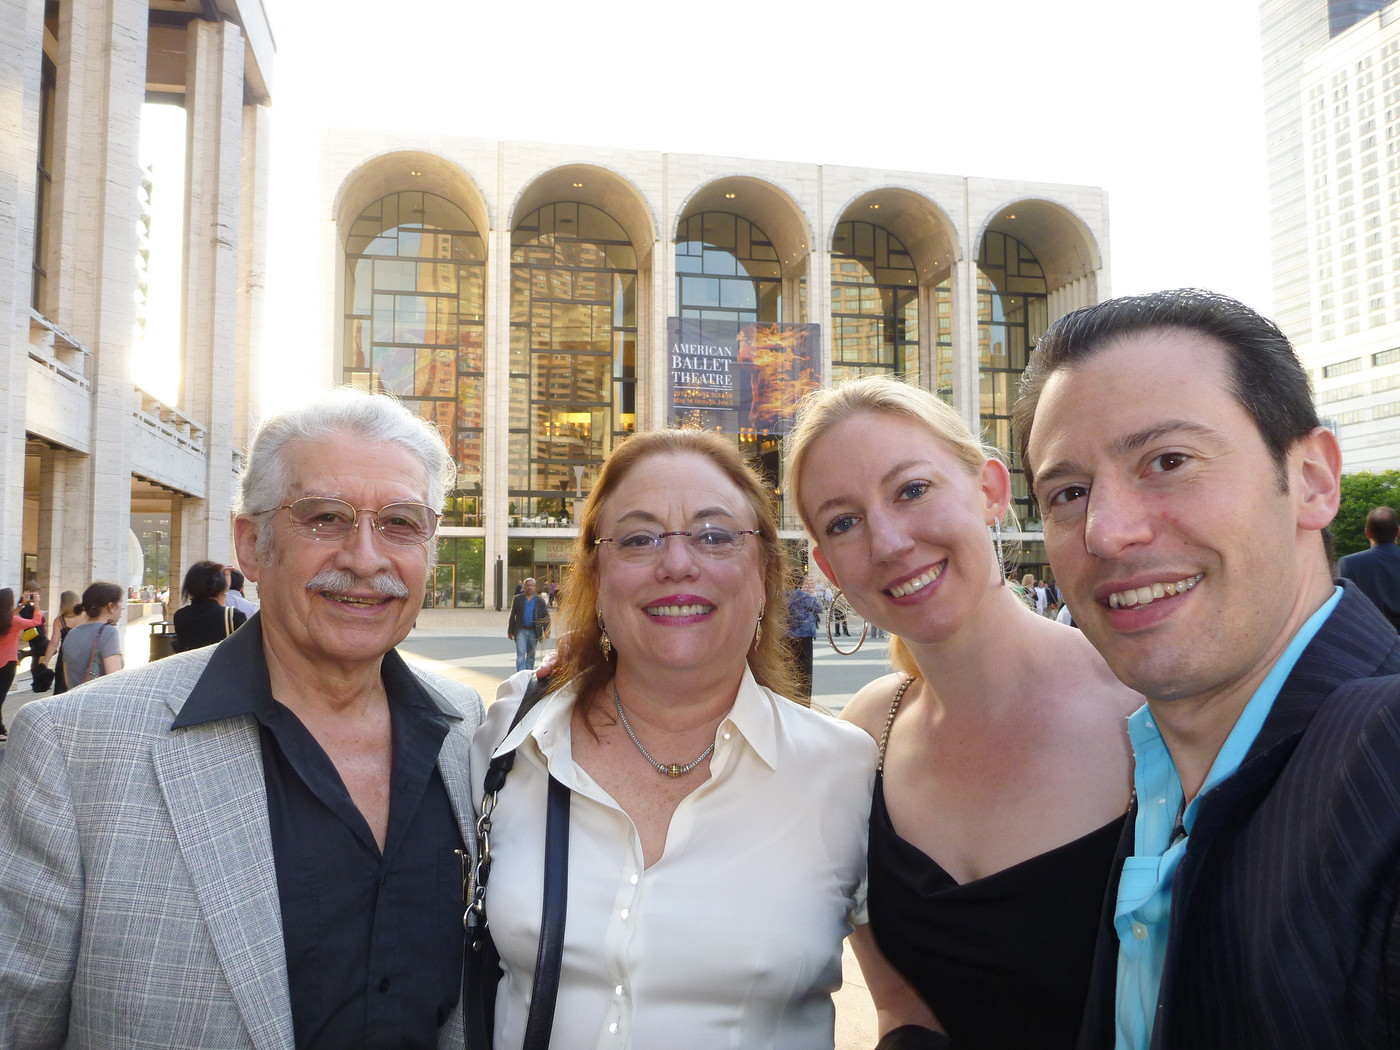 Novoa Family goes to see American Ballet Theatre